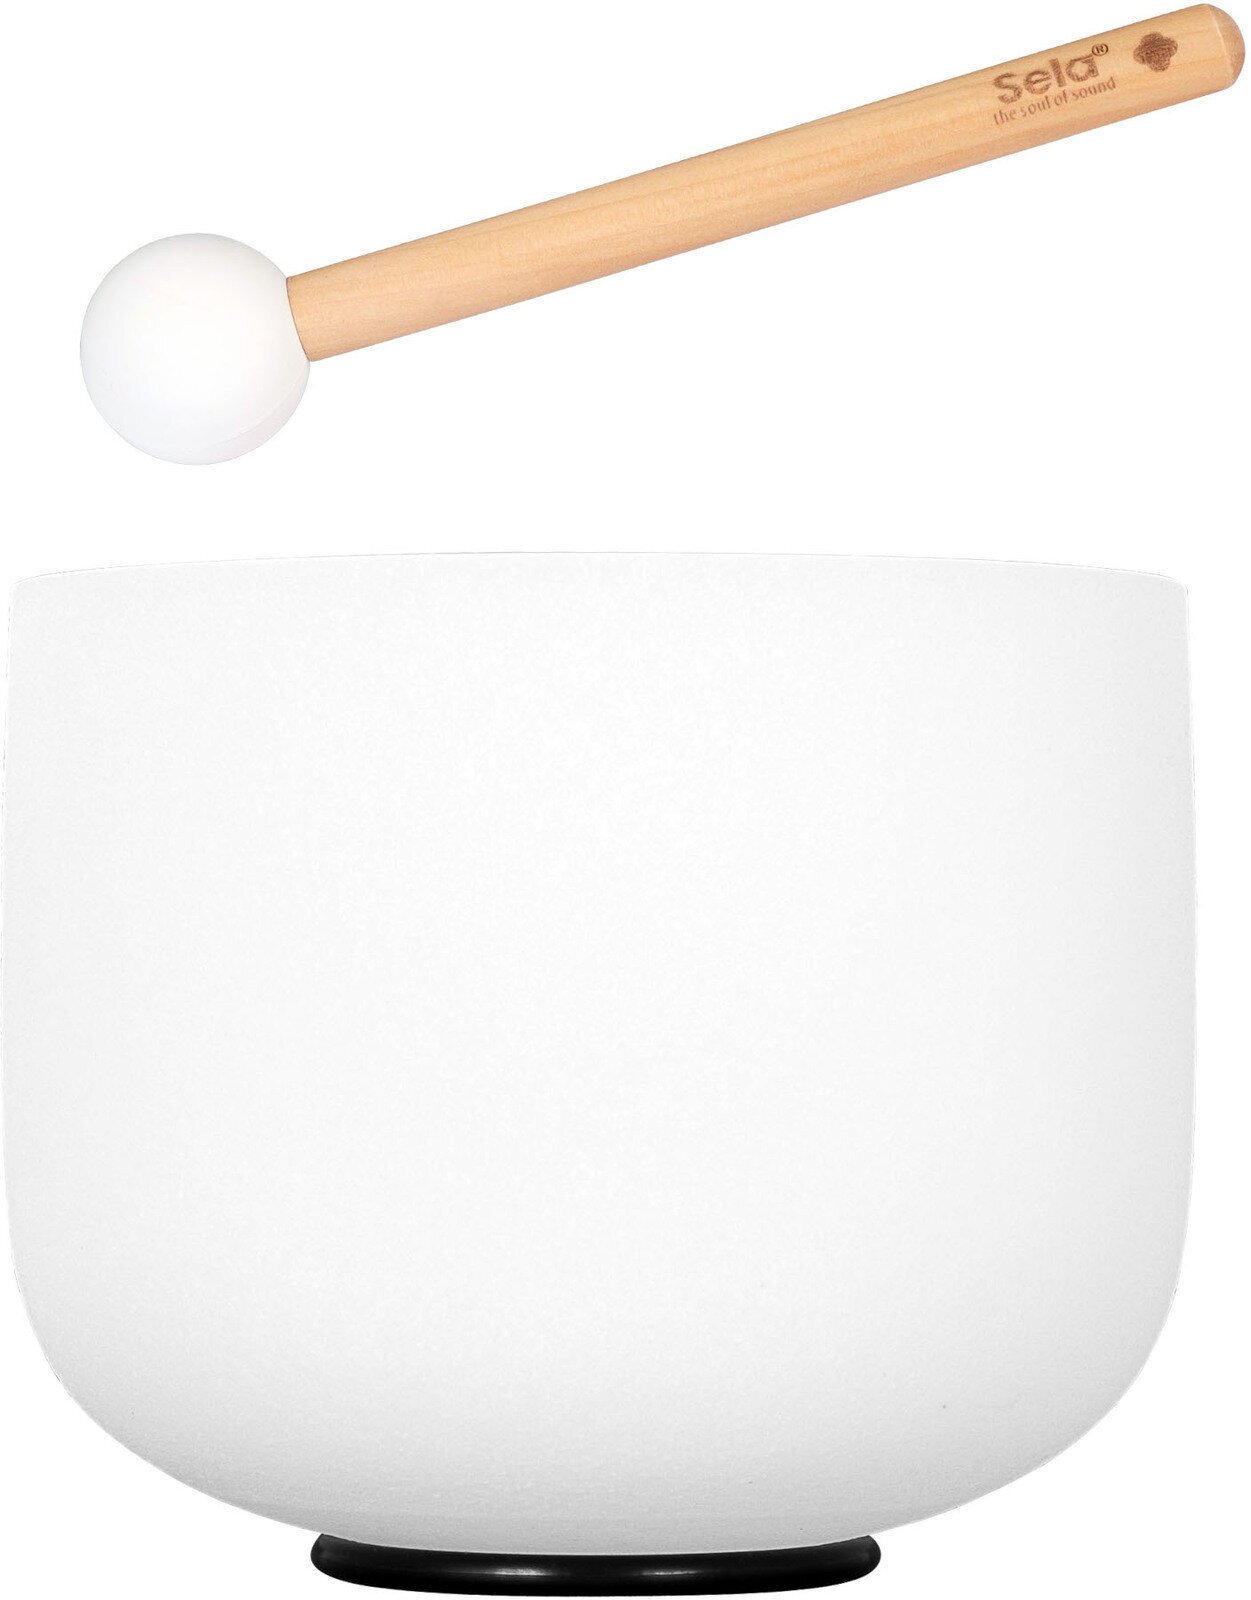 Percussion for music therapy Sela 8" Crystal Singing Bowl Frosted 440 Hz G incl. 1 Wood Mallet